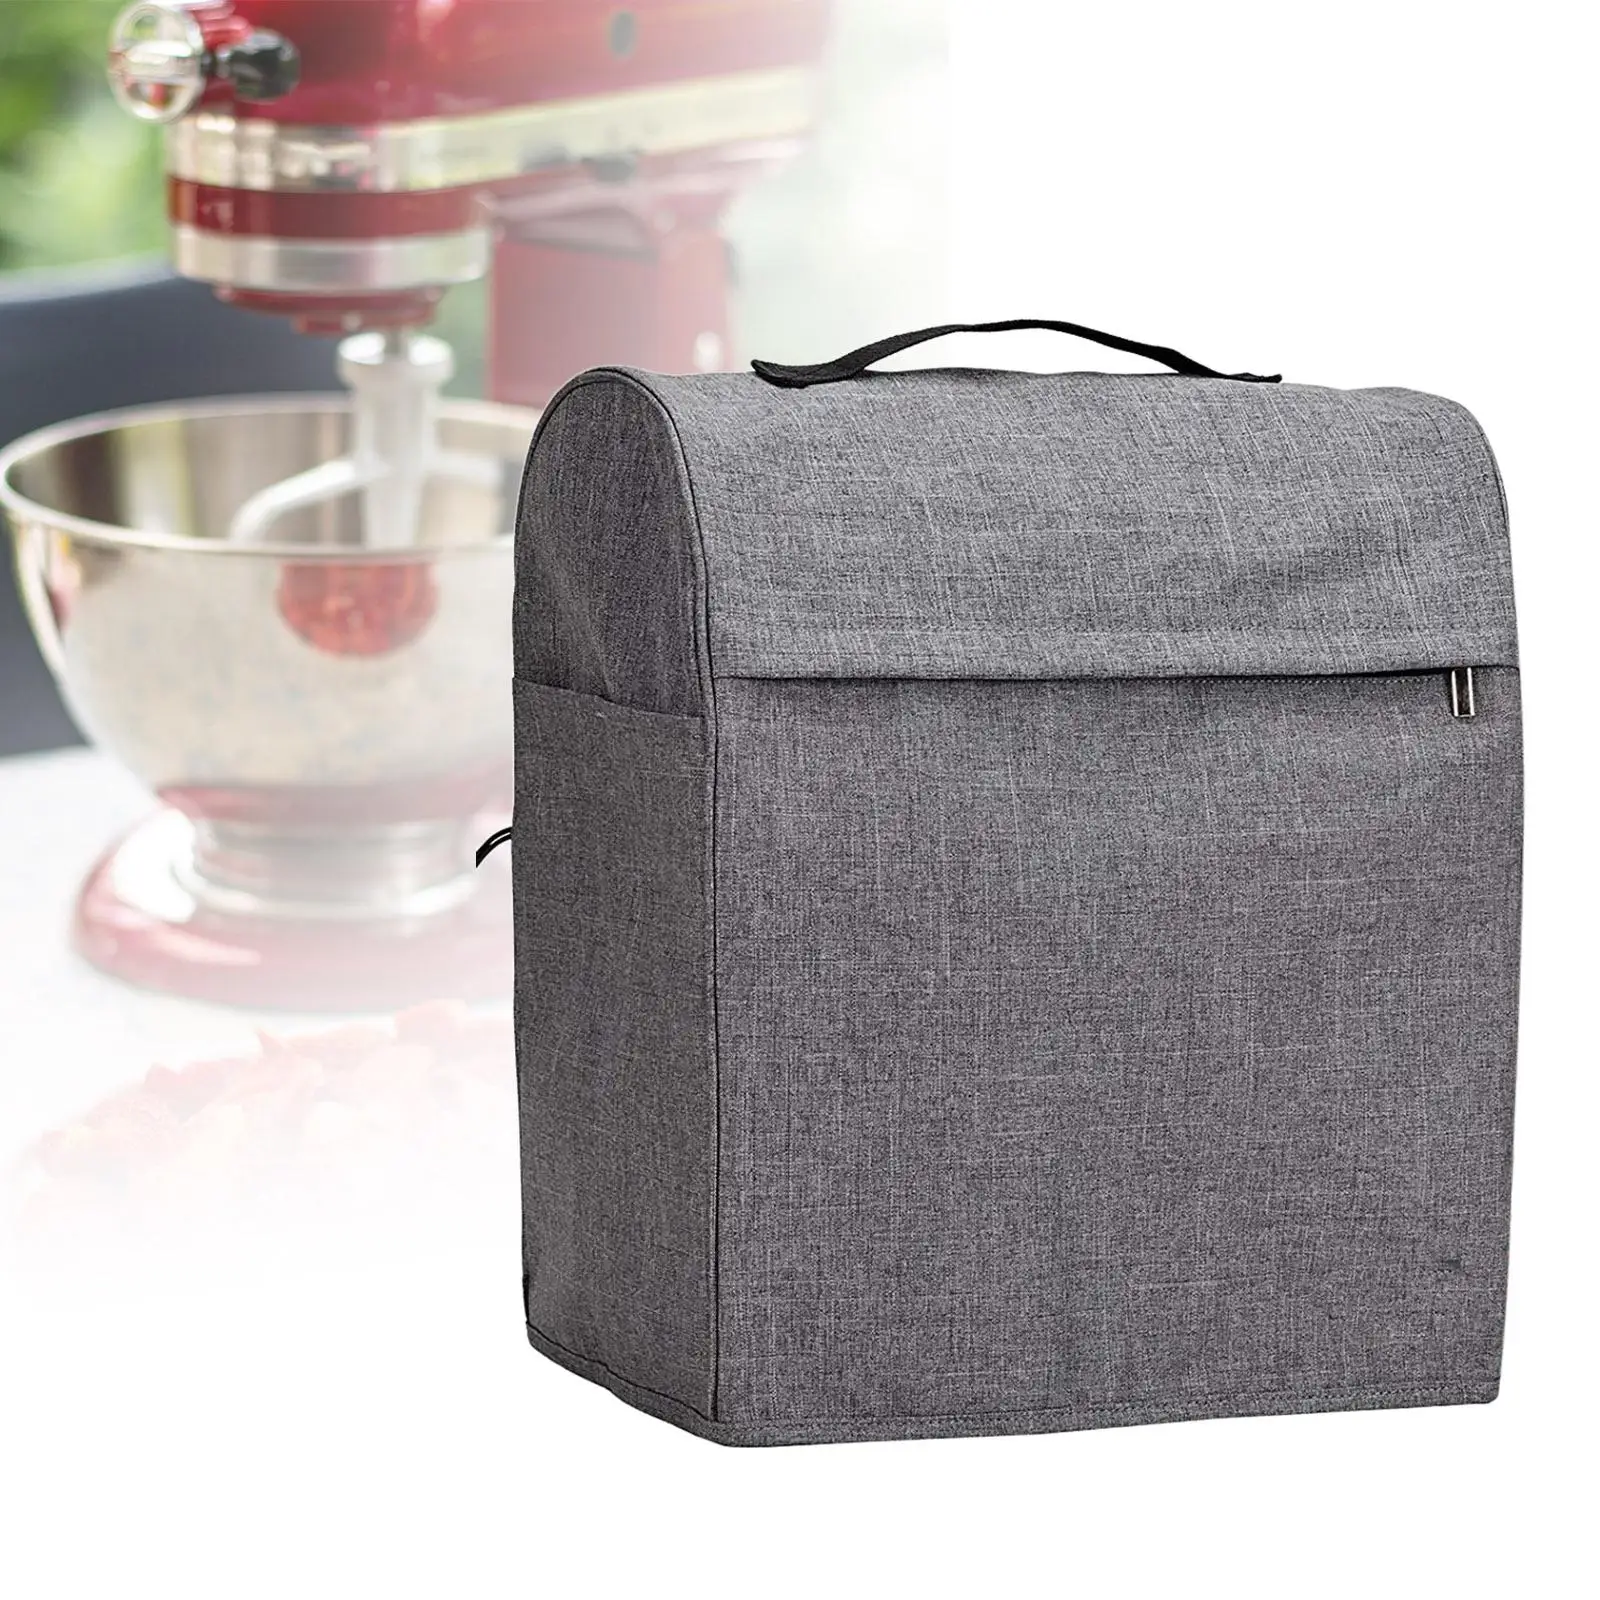 Mixer Cover Blender Dust Cover Portable Easy to Clean Gadget Tool